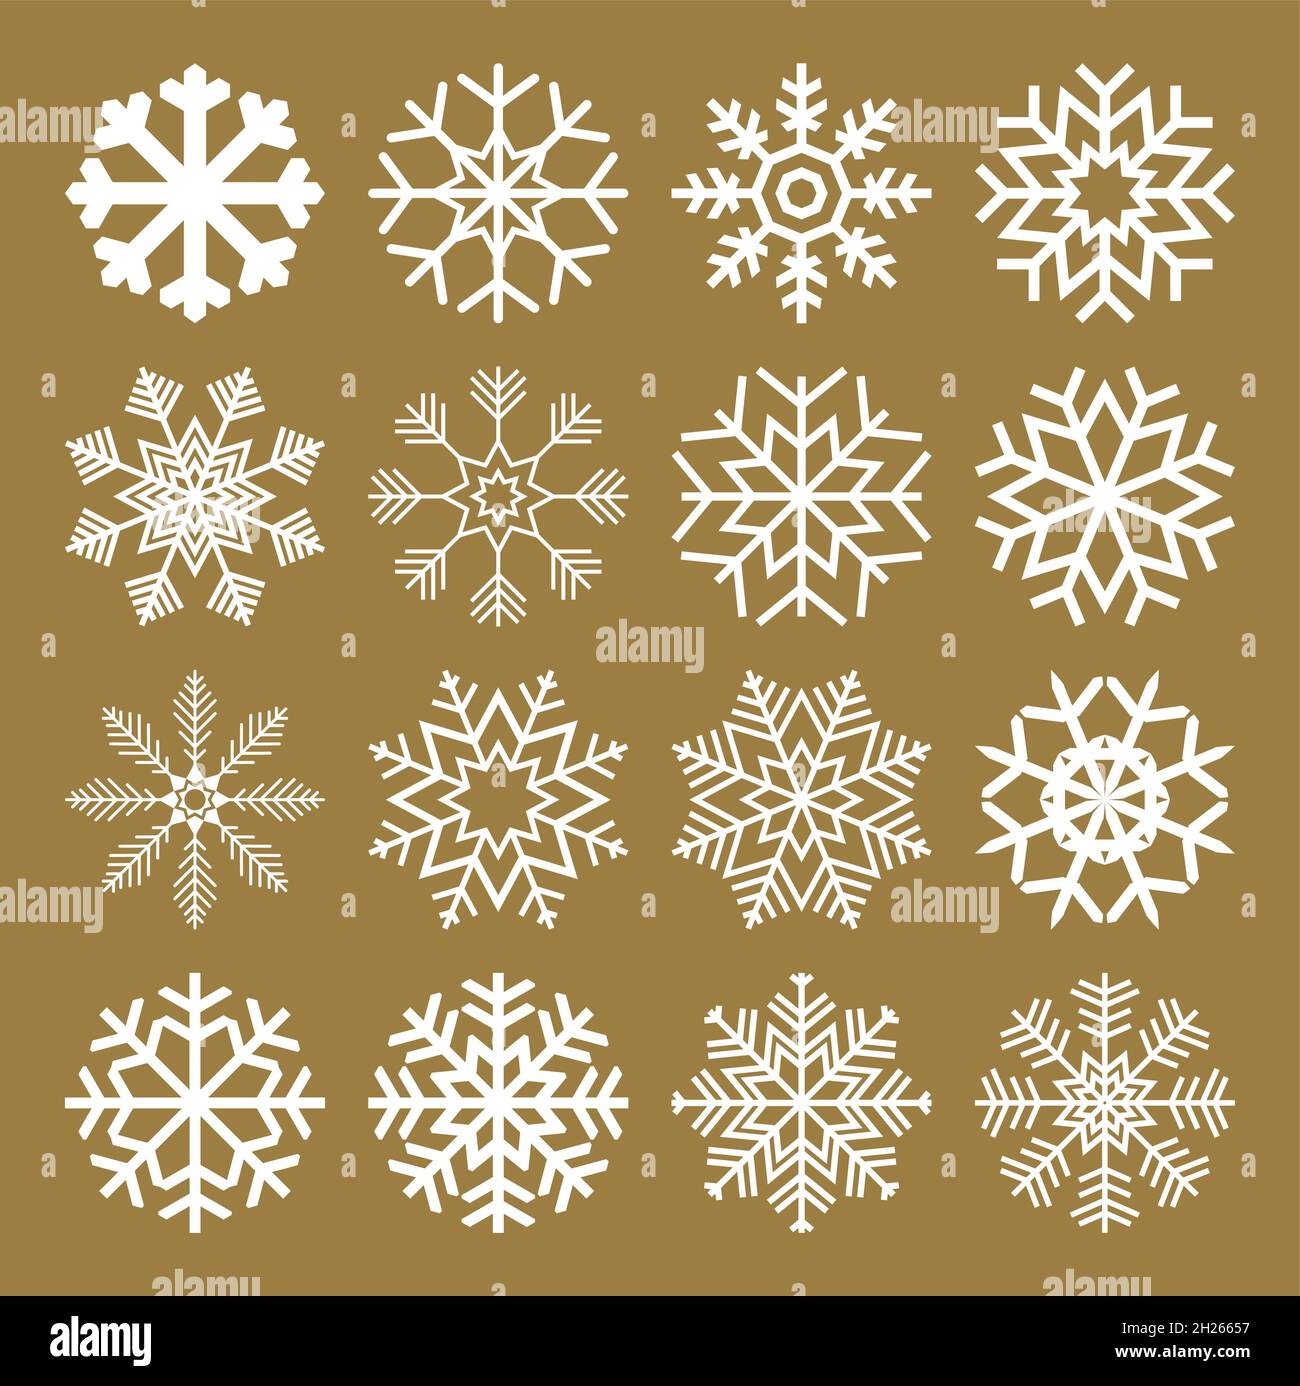 eps10 vector file with collection of different abstract snow flakes for xmas and winter time concepts Stock Vector